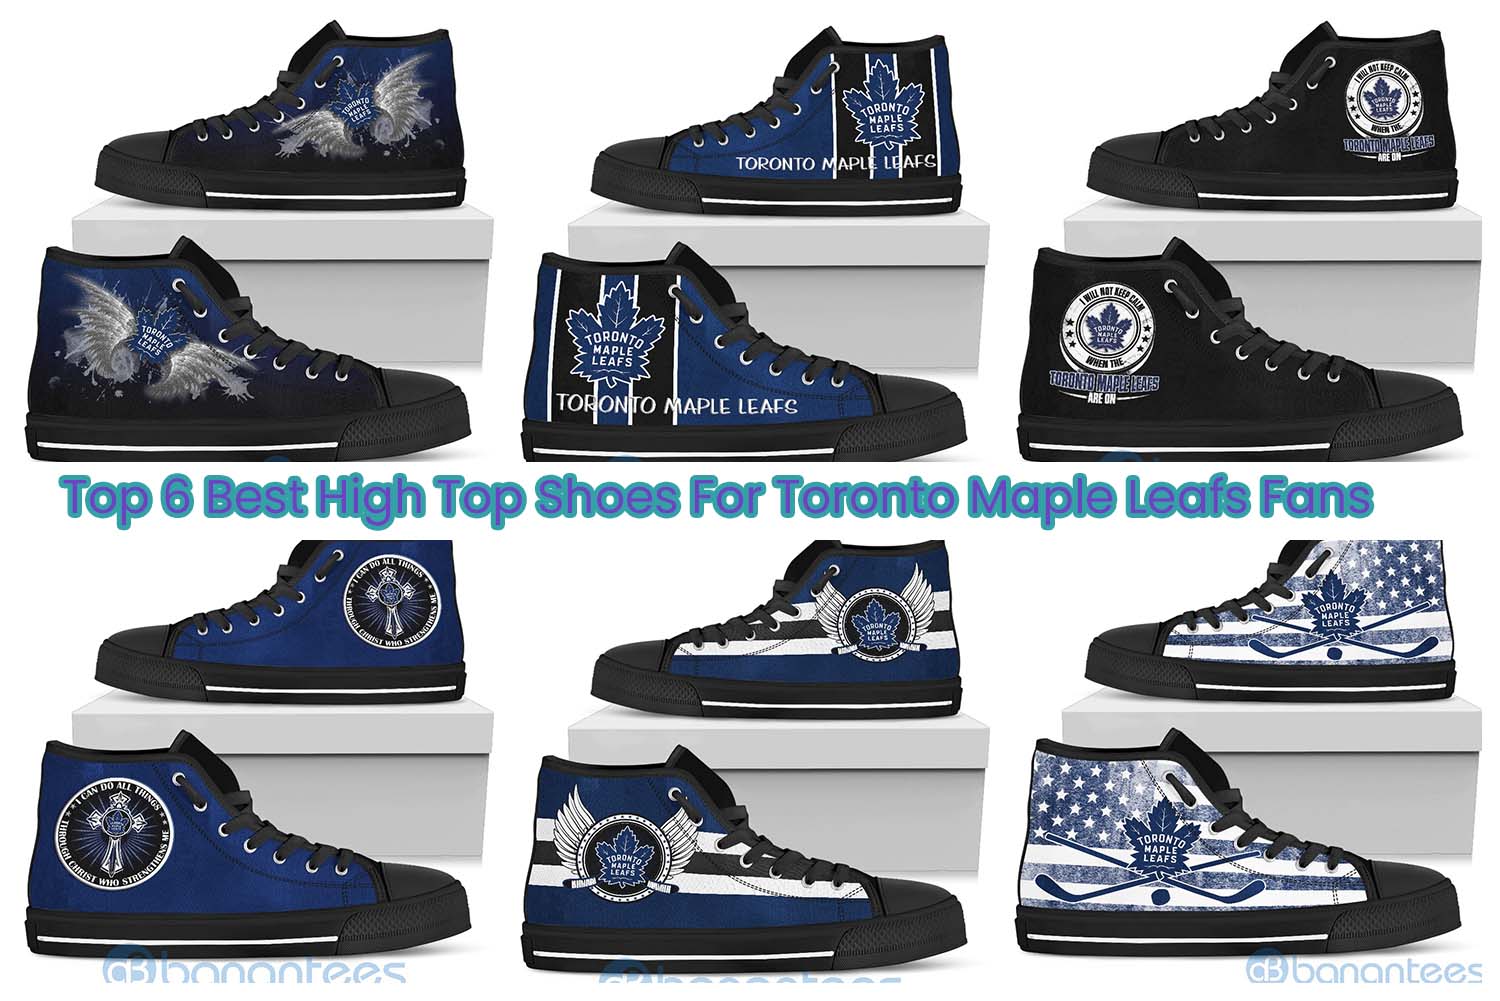 Top 6 Best High Top Shoes For Toronto Maple Leafs Fans